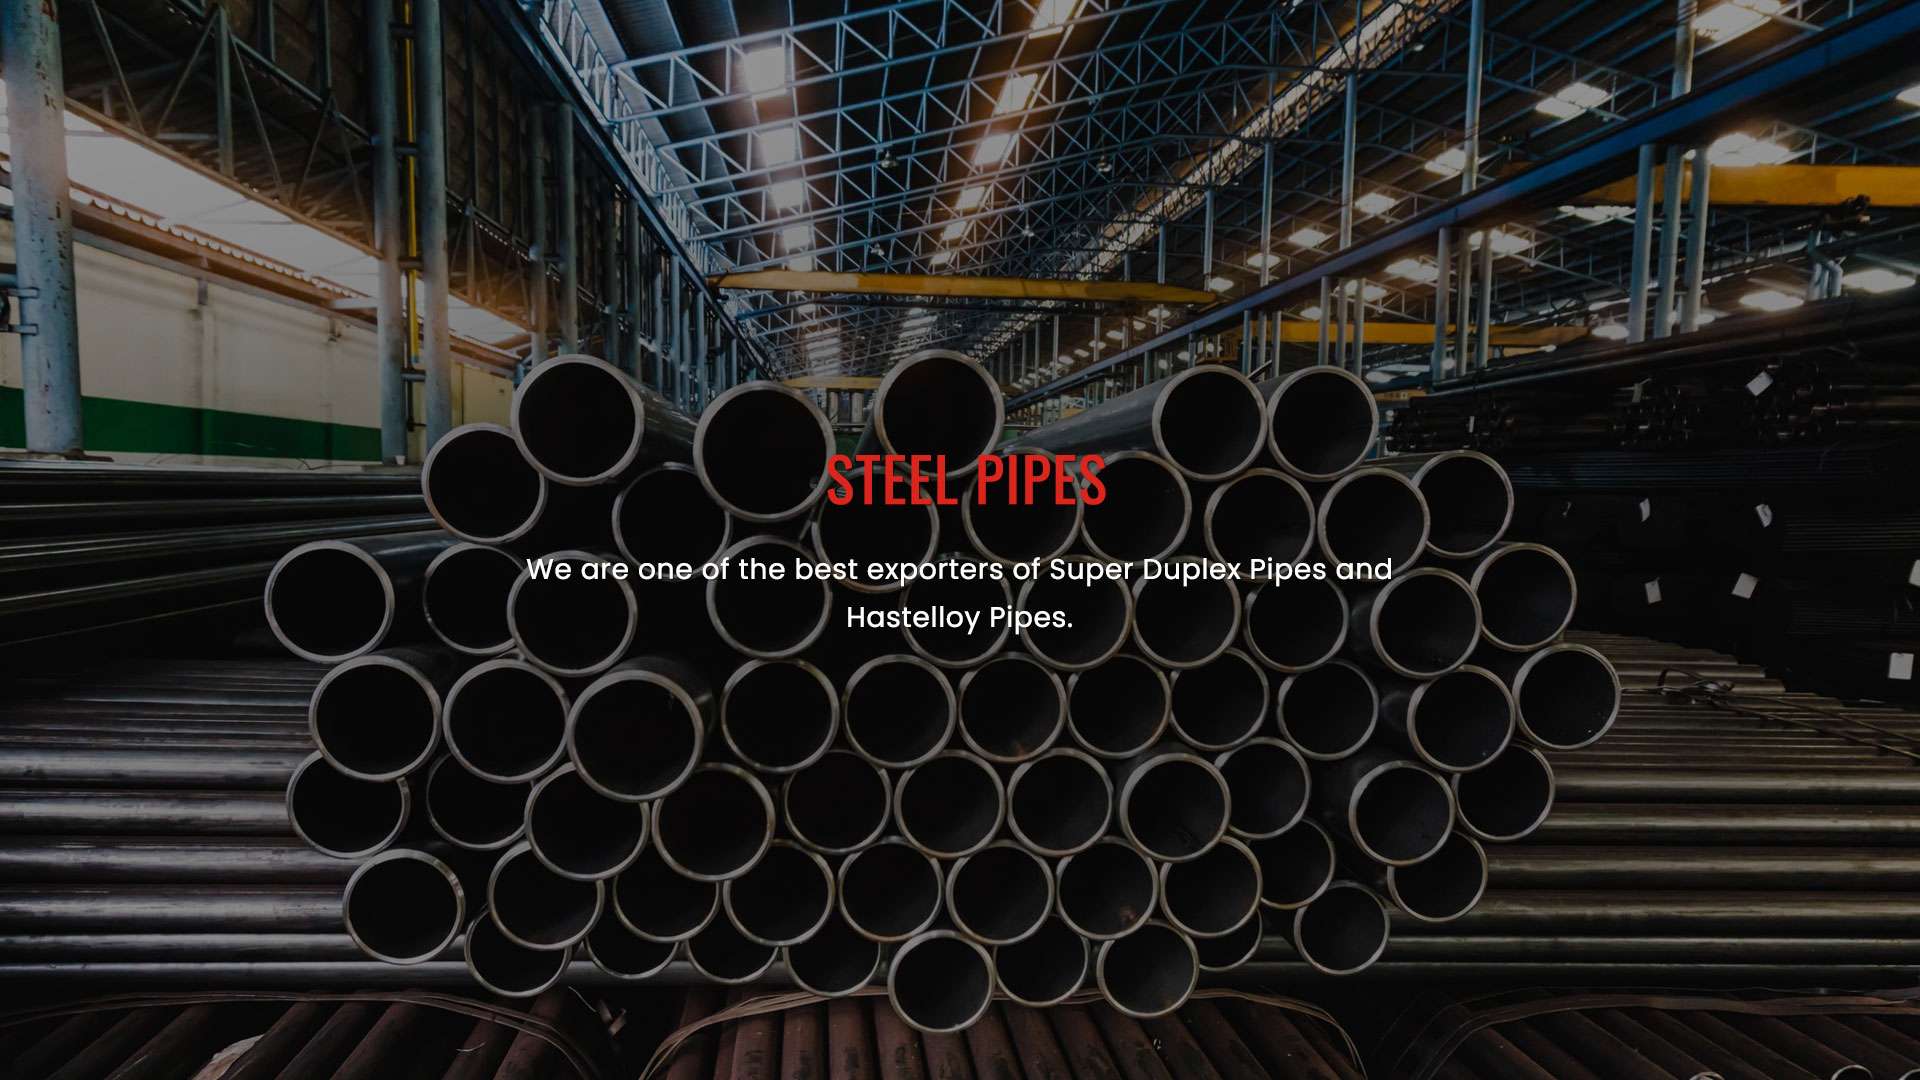  Steel Pipes Manufacturers in Qatar